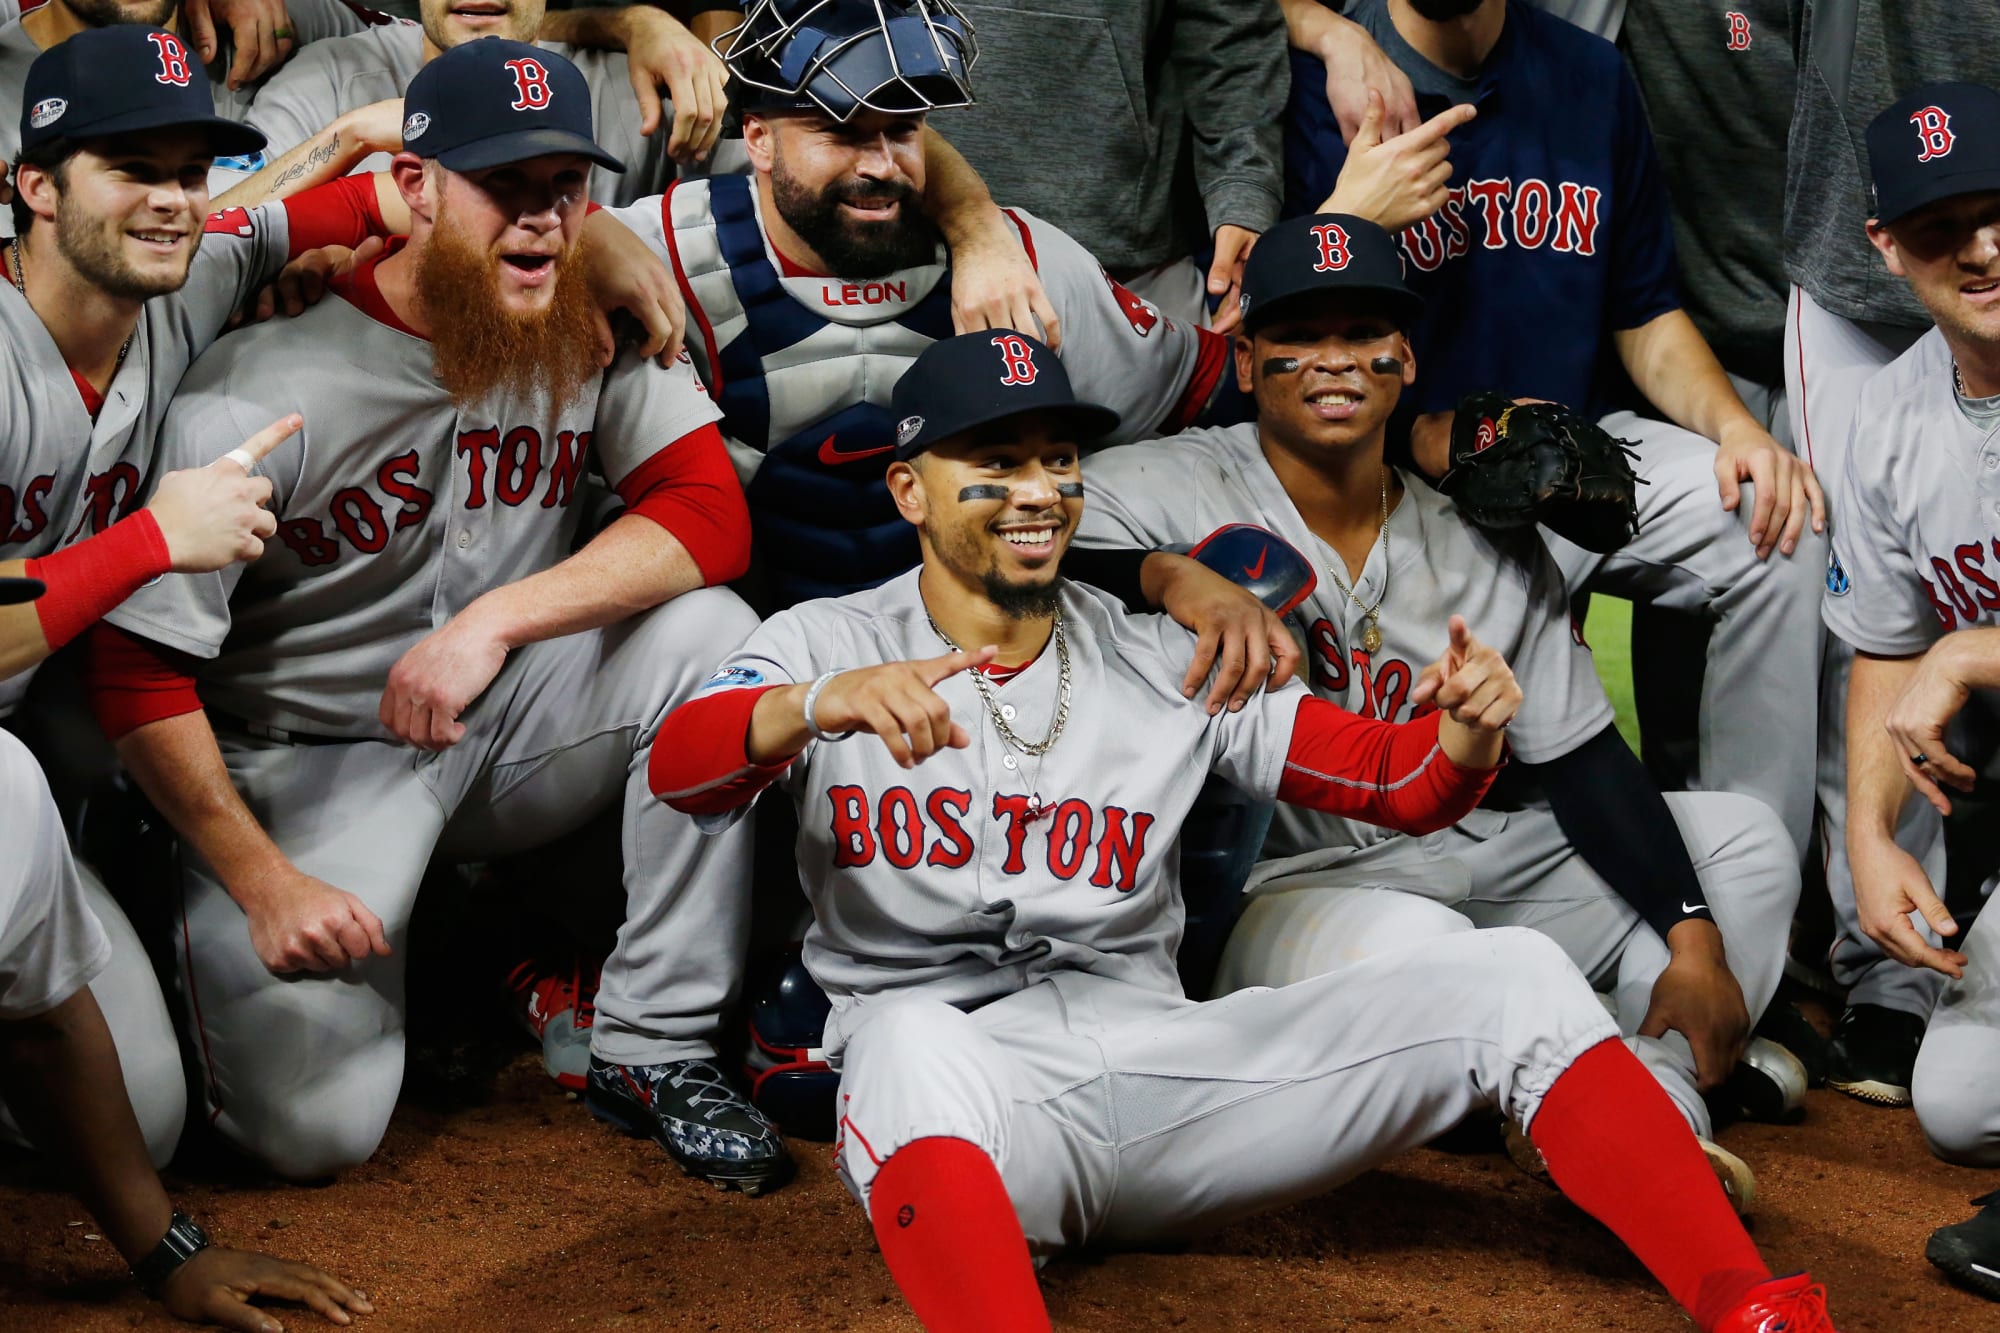 Boston Red Sox These 3 players are key to World Series triumph